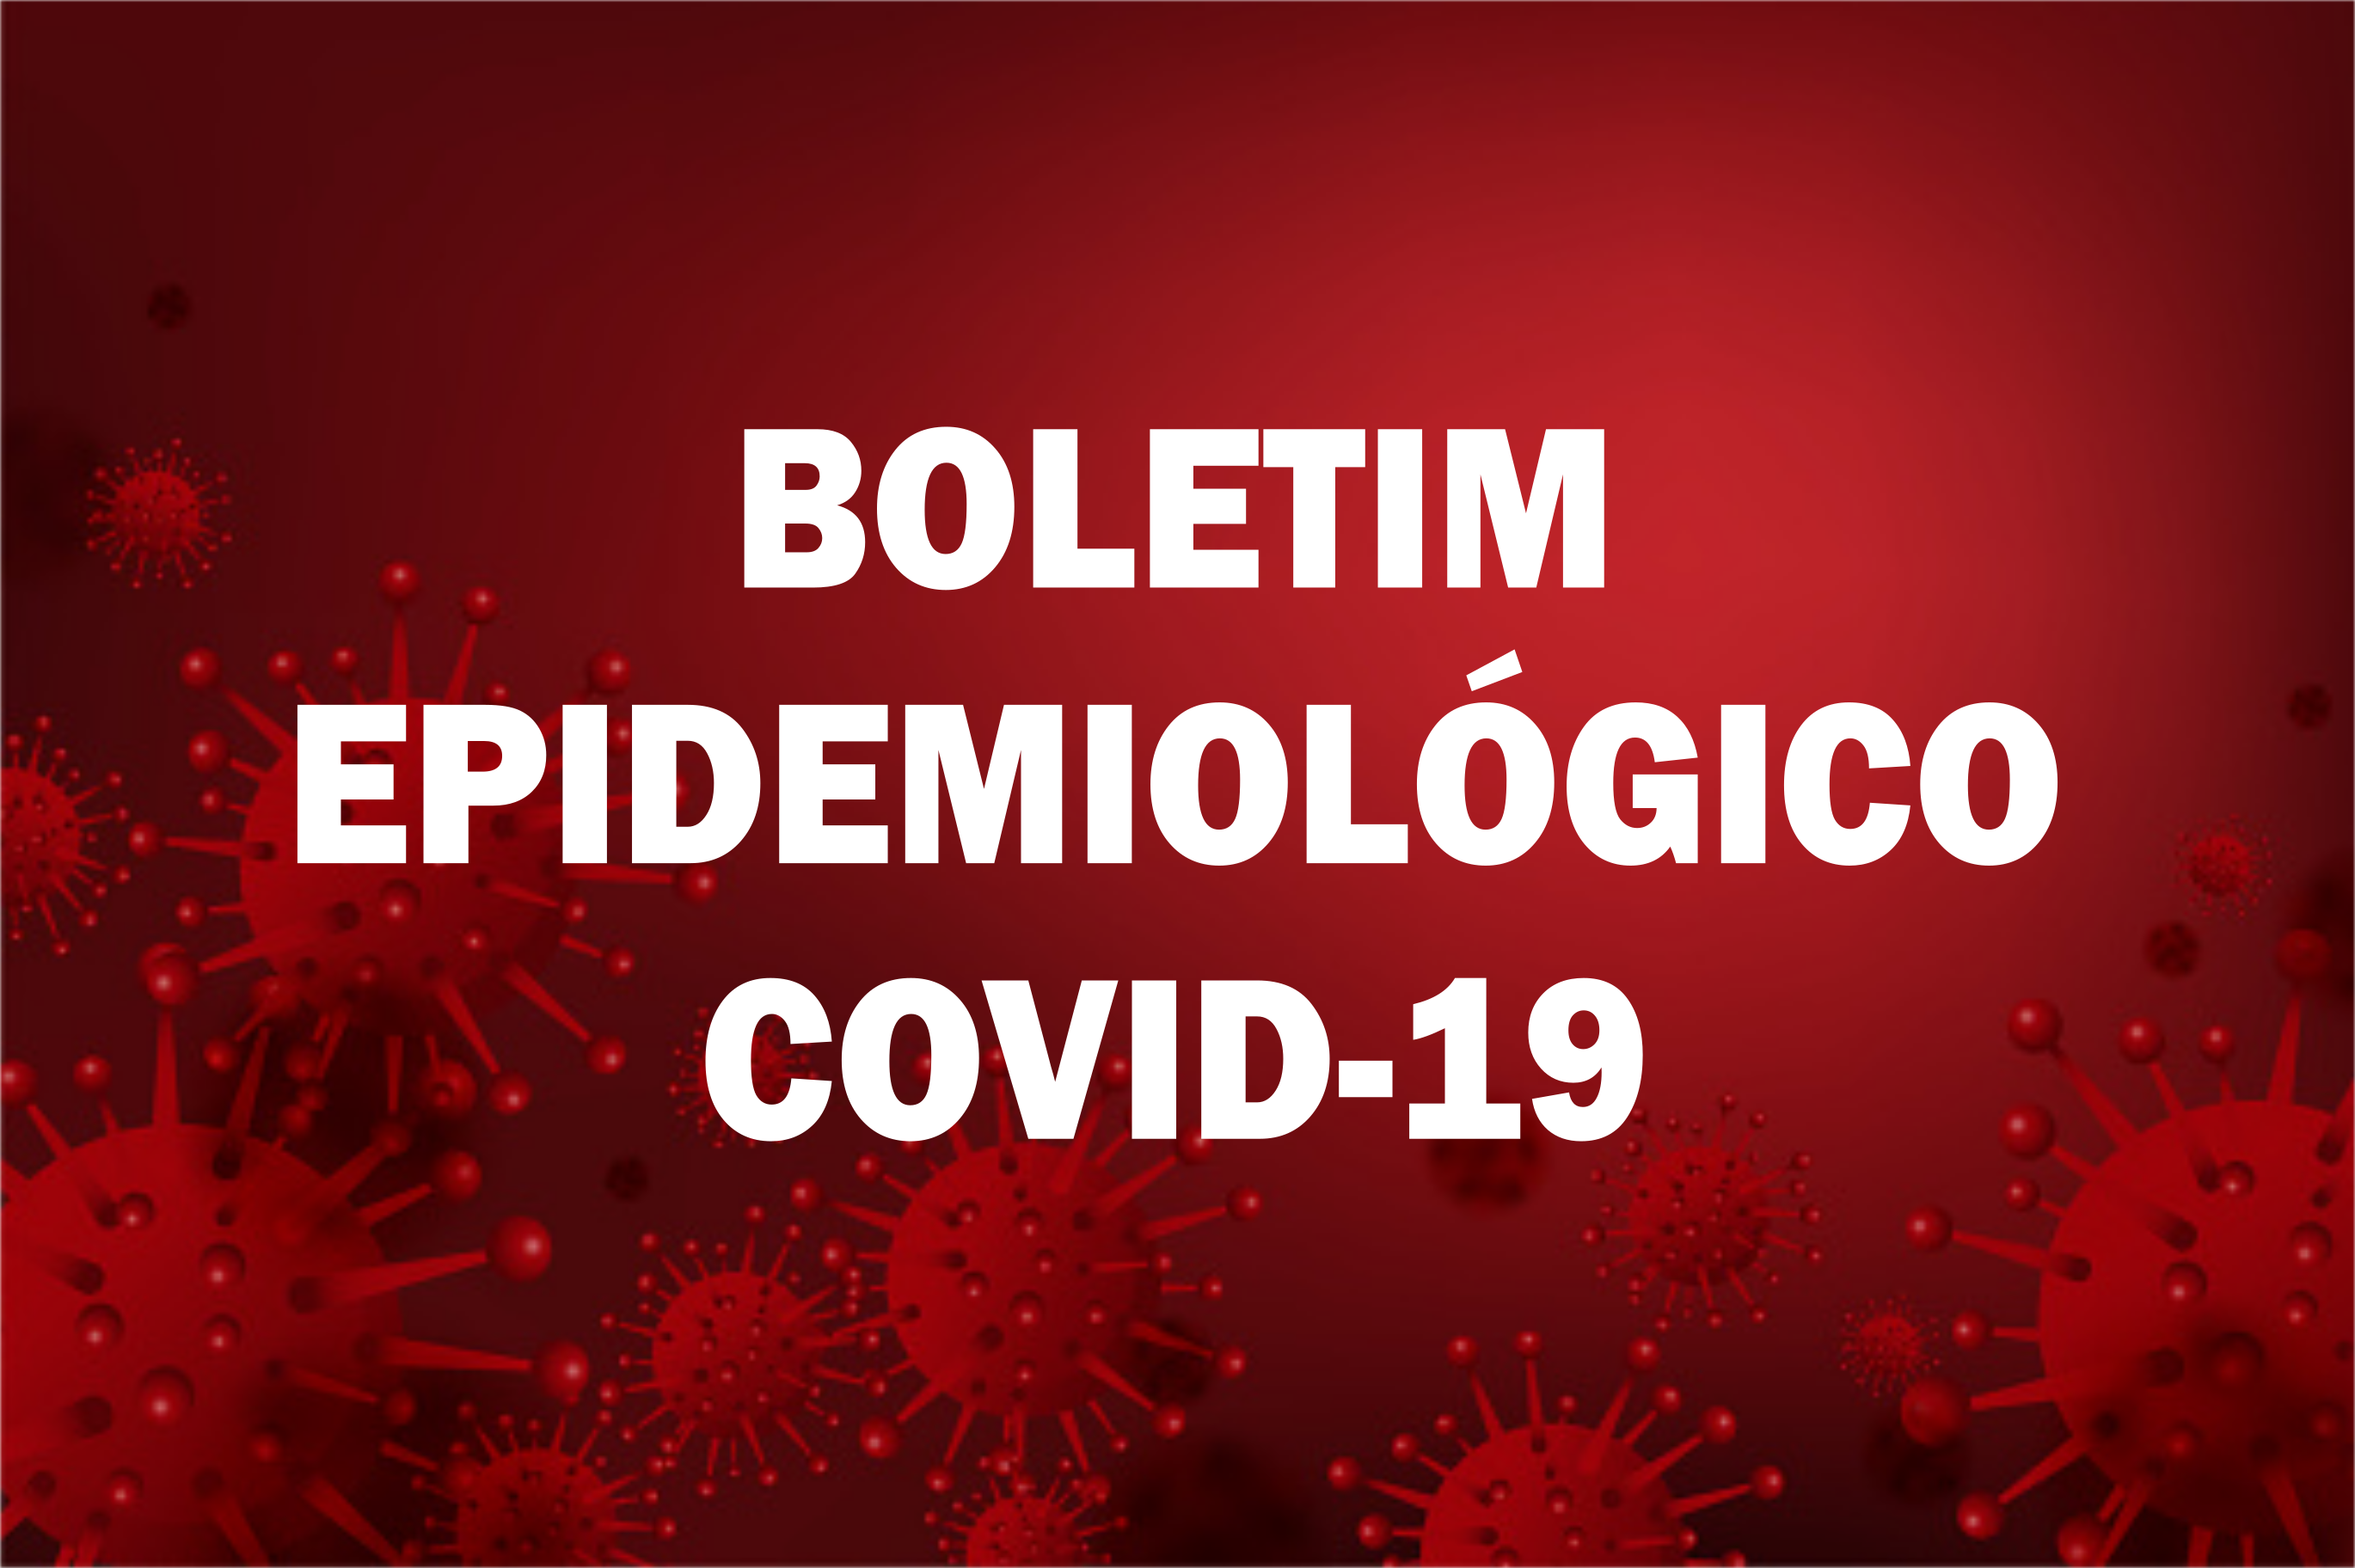 You are currently viewing BOLETIM EPIDEMIOLÓGICO Nº 146 (COVID-19)